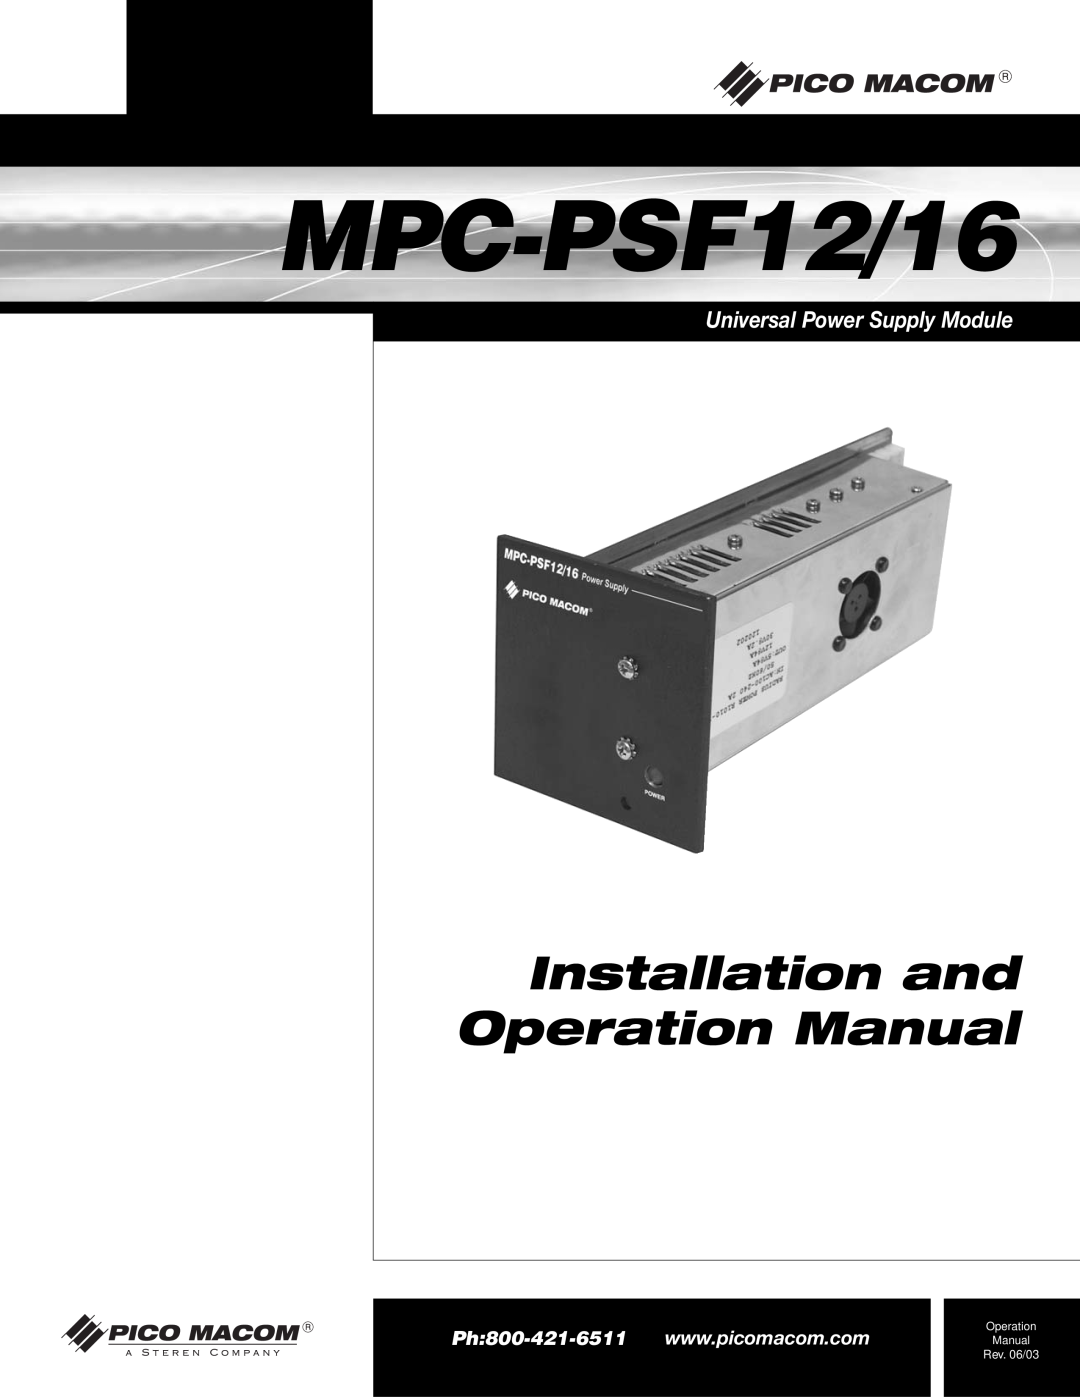 Pico Macom MPC-PSF16 operation manual MPC-PSF12/16, Universal Power Supply Module, Installation and Operation Manual 